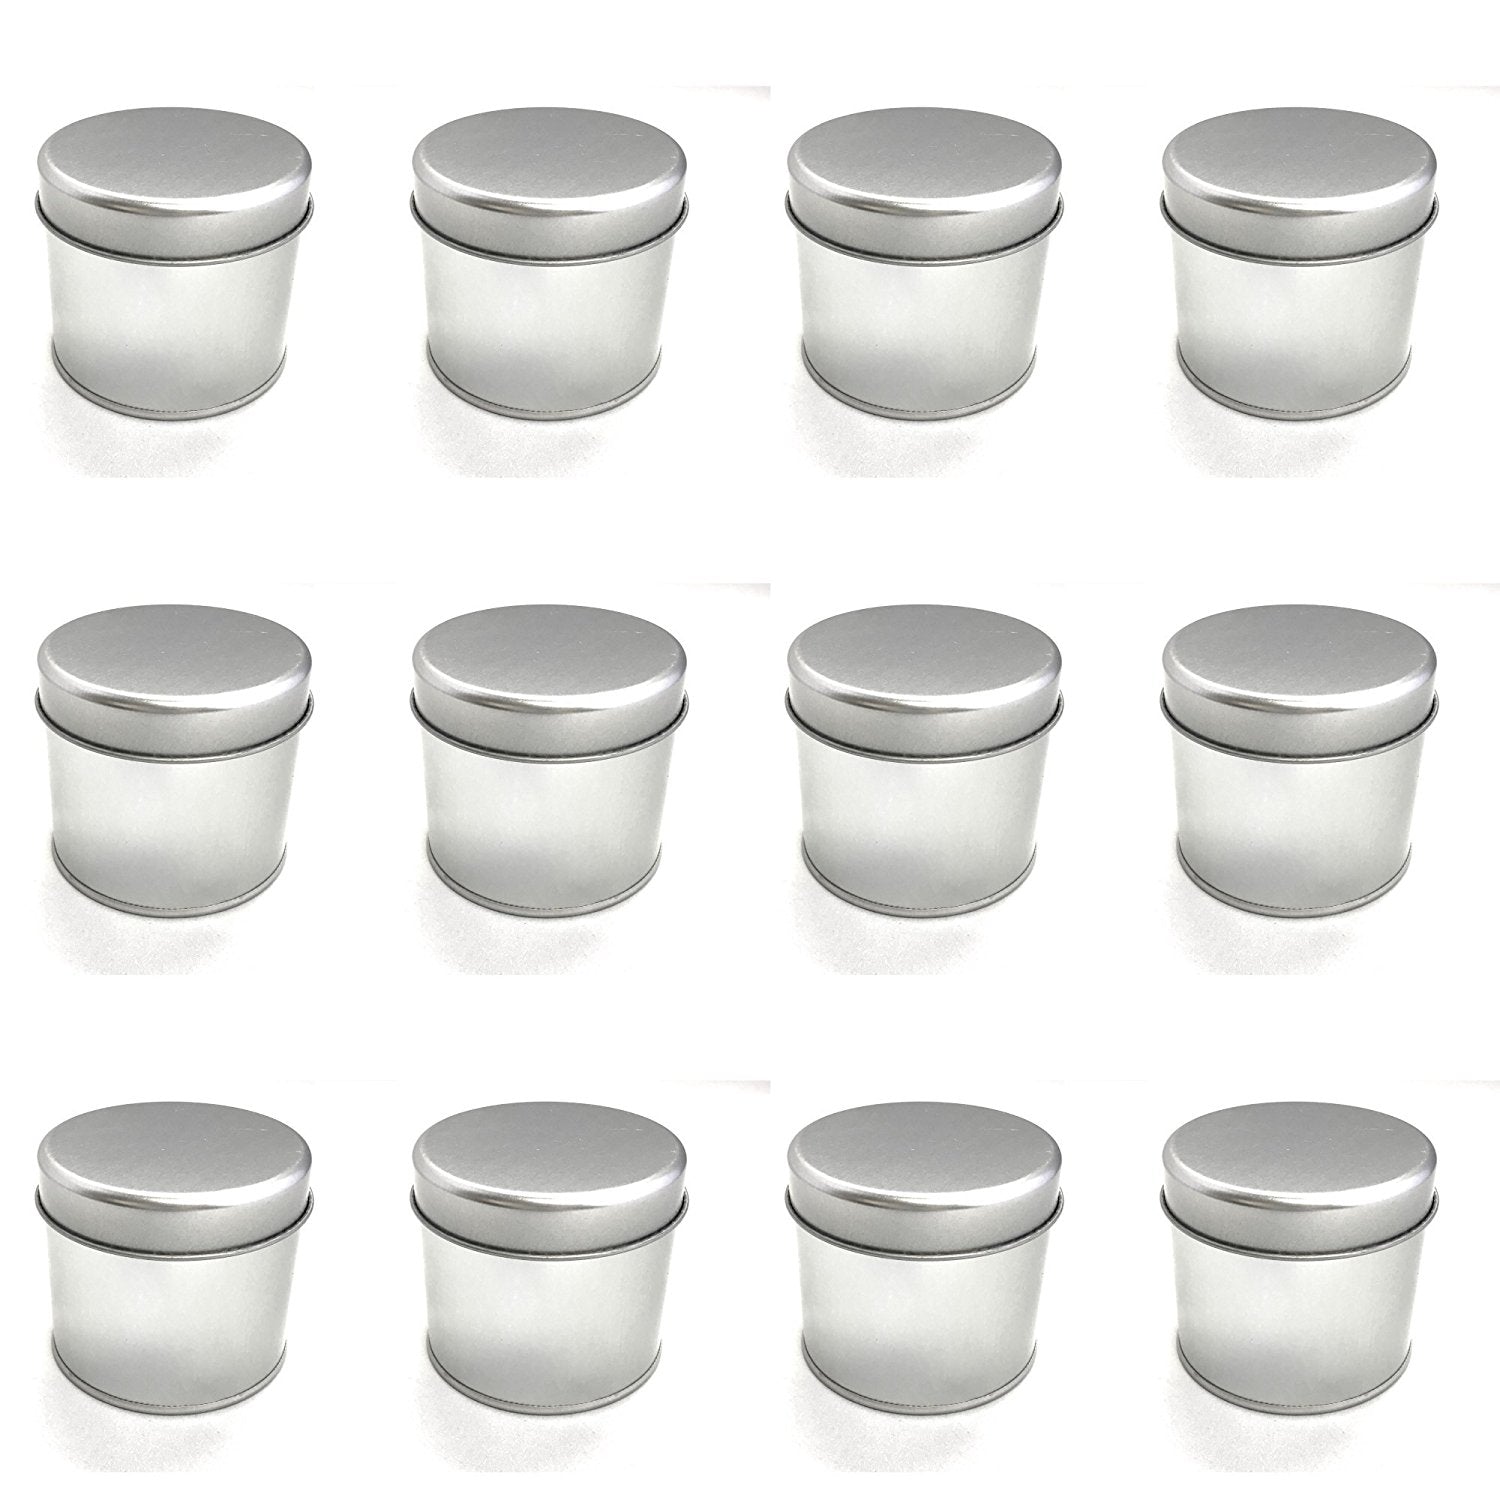 Tin Cans, 12 Pack – Large (8 oz) – 3” x 2.6” – For Creams, Crafts, Storing Spices and Candy - RingBinderDepot.com